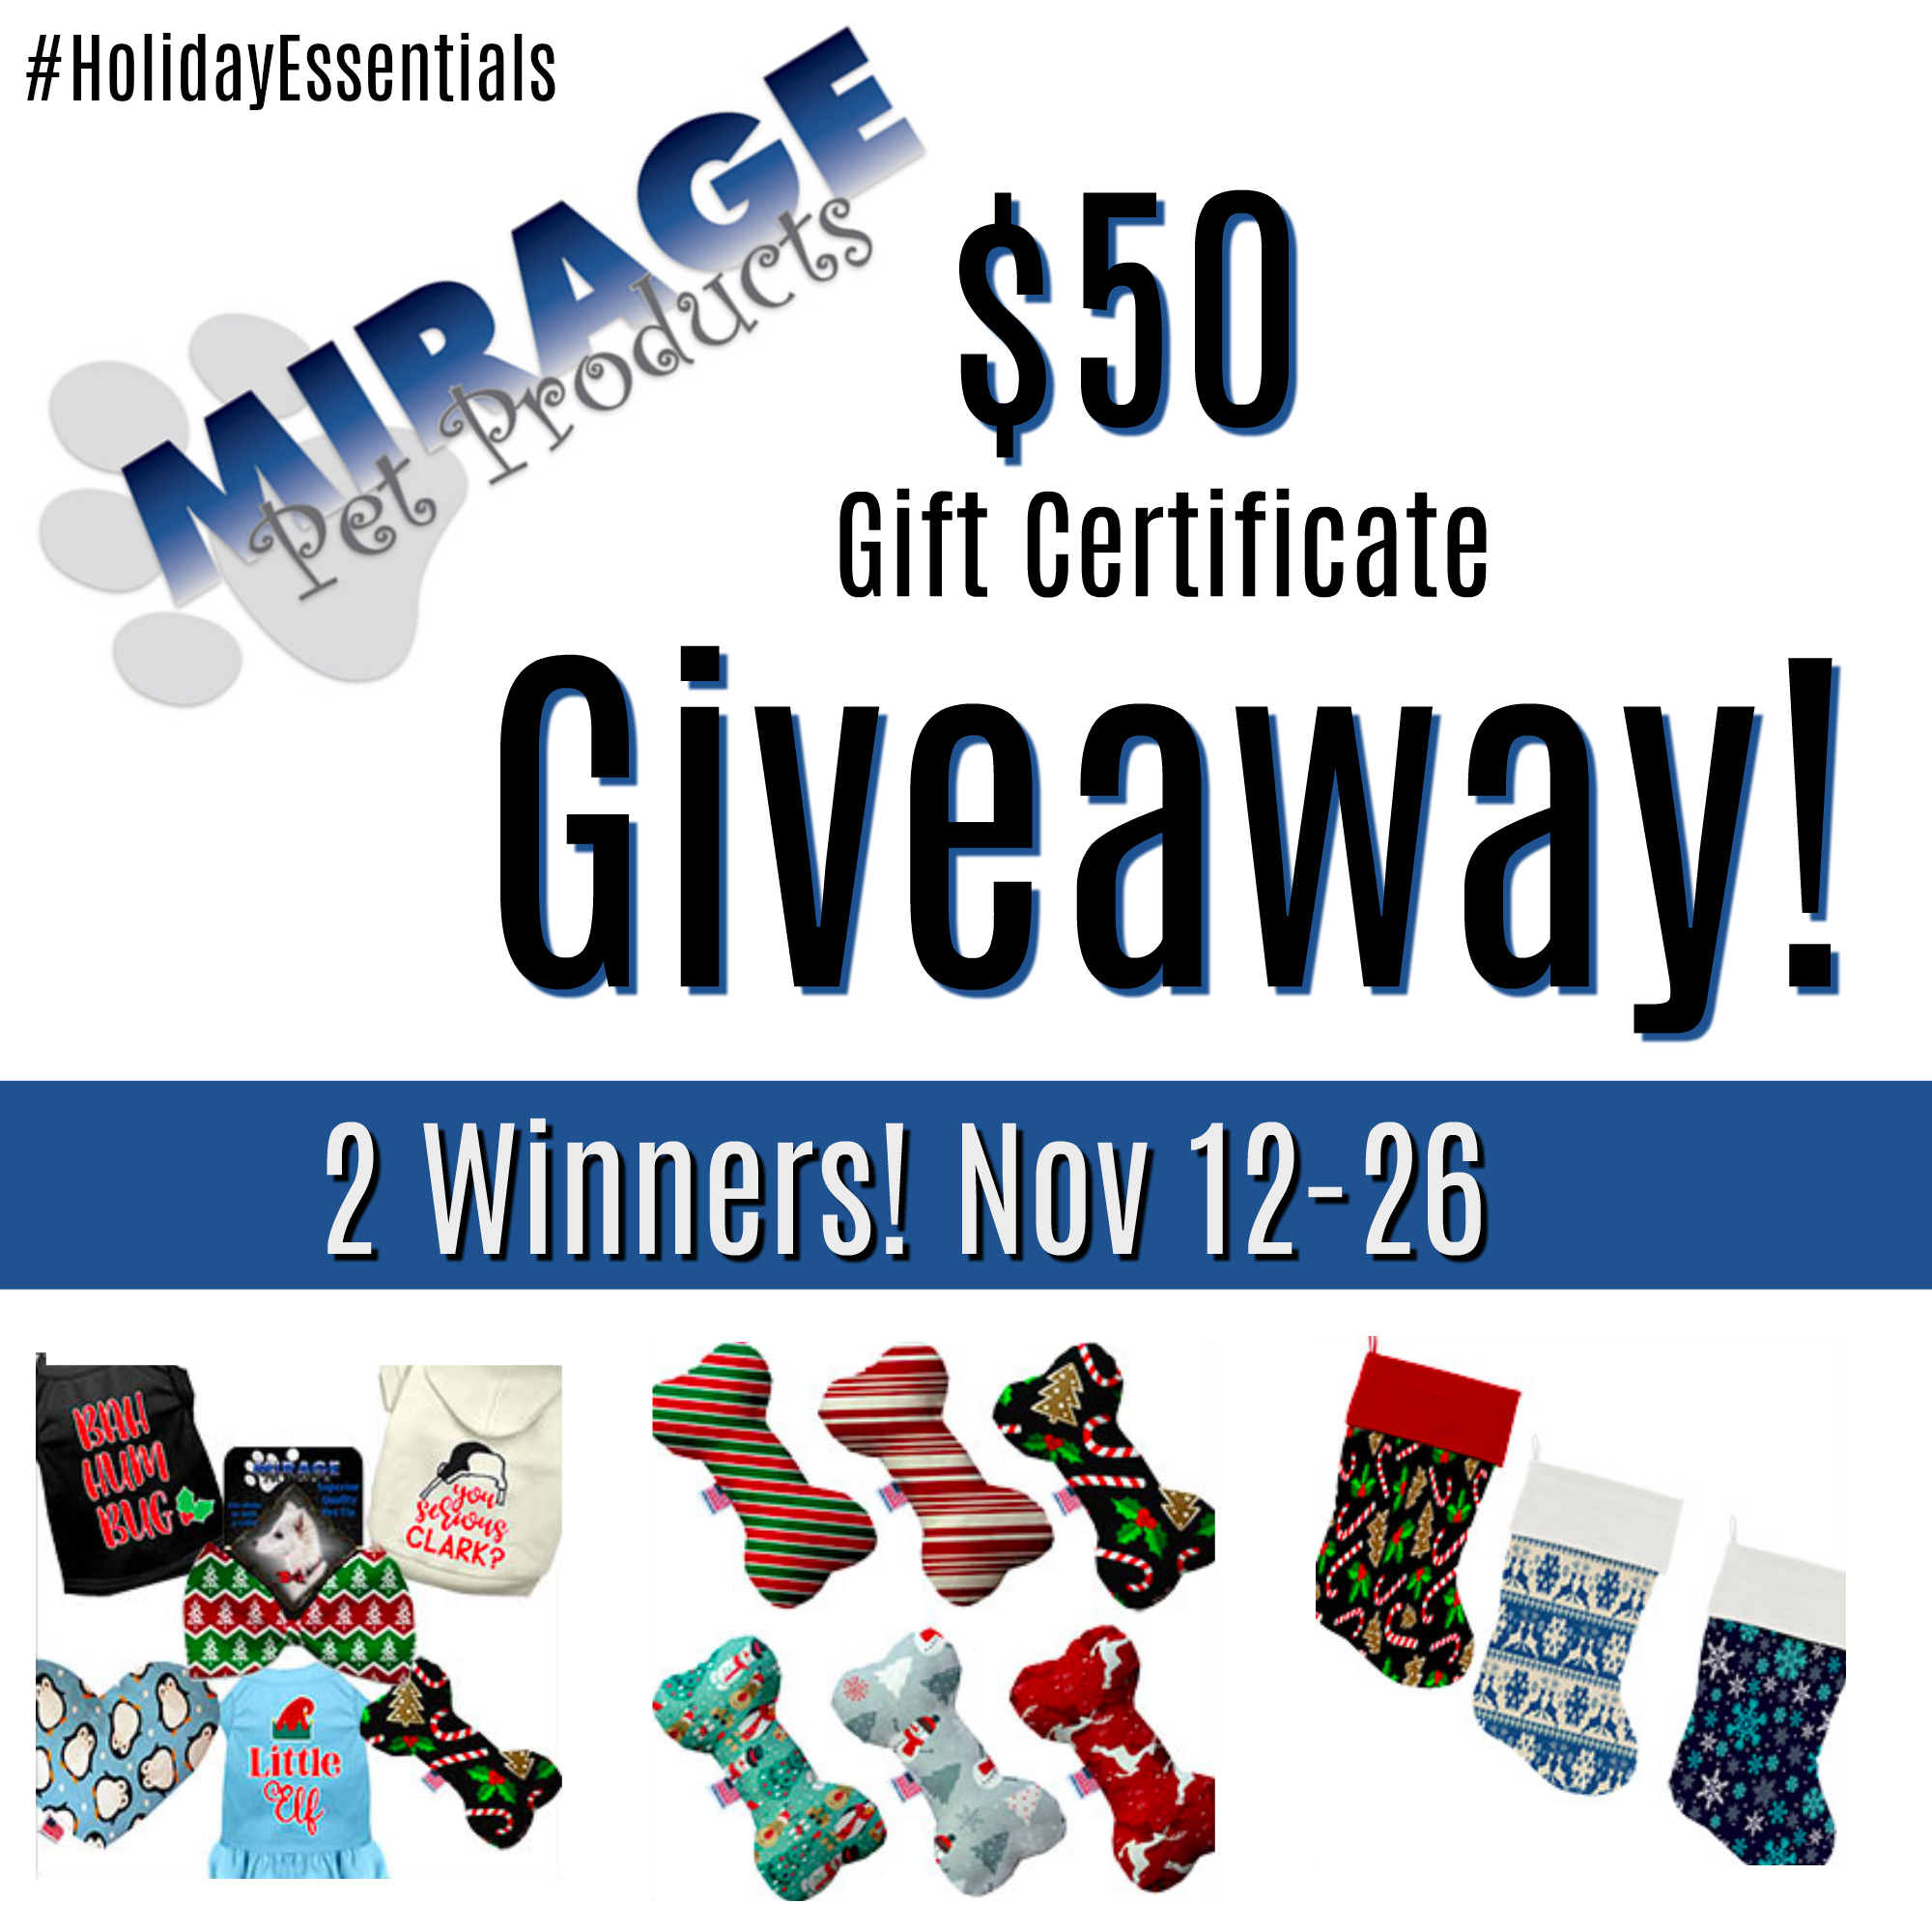 Mirage Pet Products Giveaway-TWO winners score $50 gift certificates! Ends 11/25 #HolidayEssentials